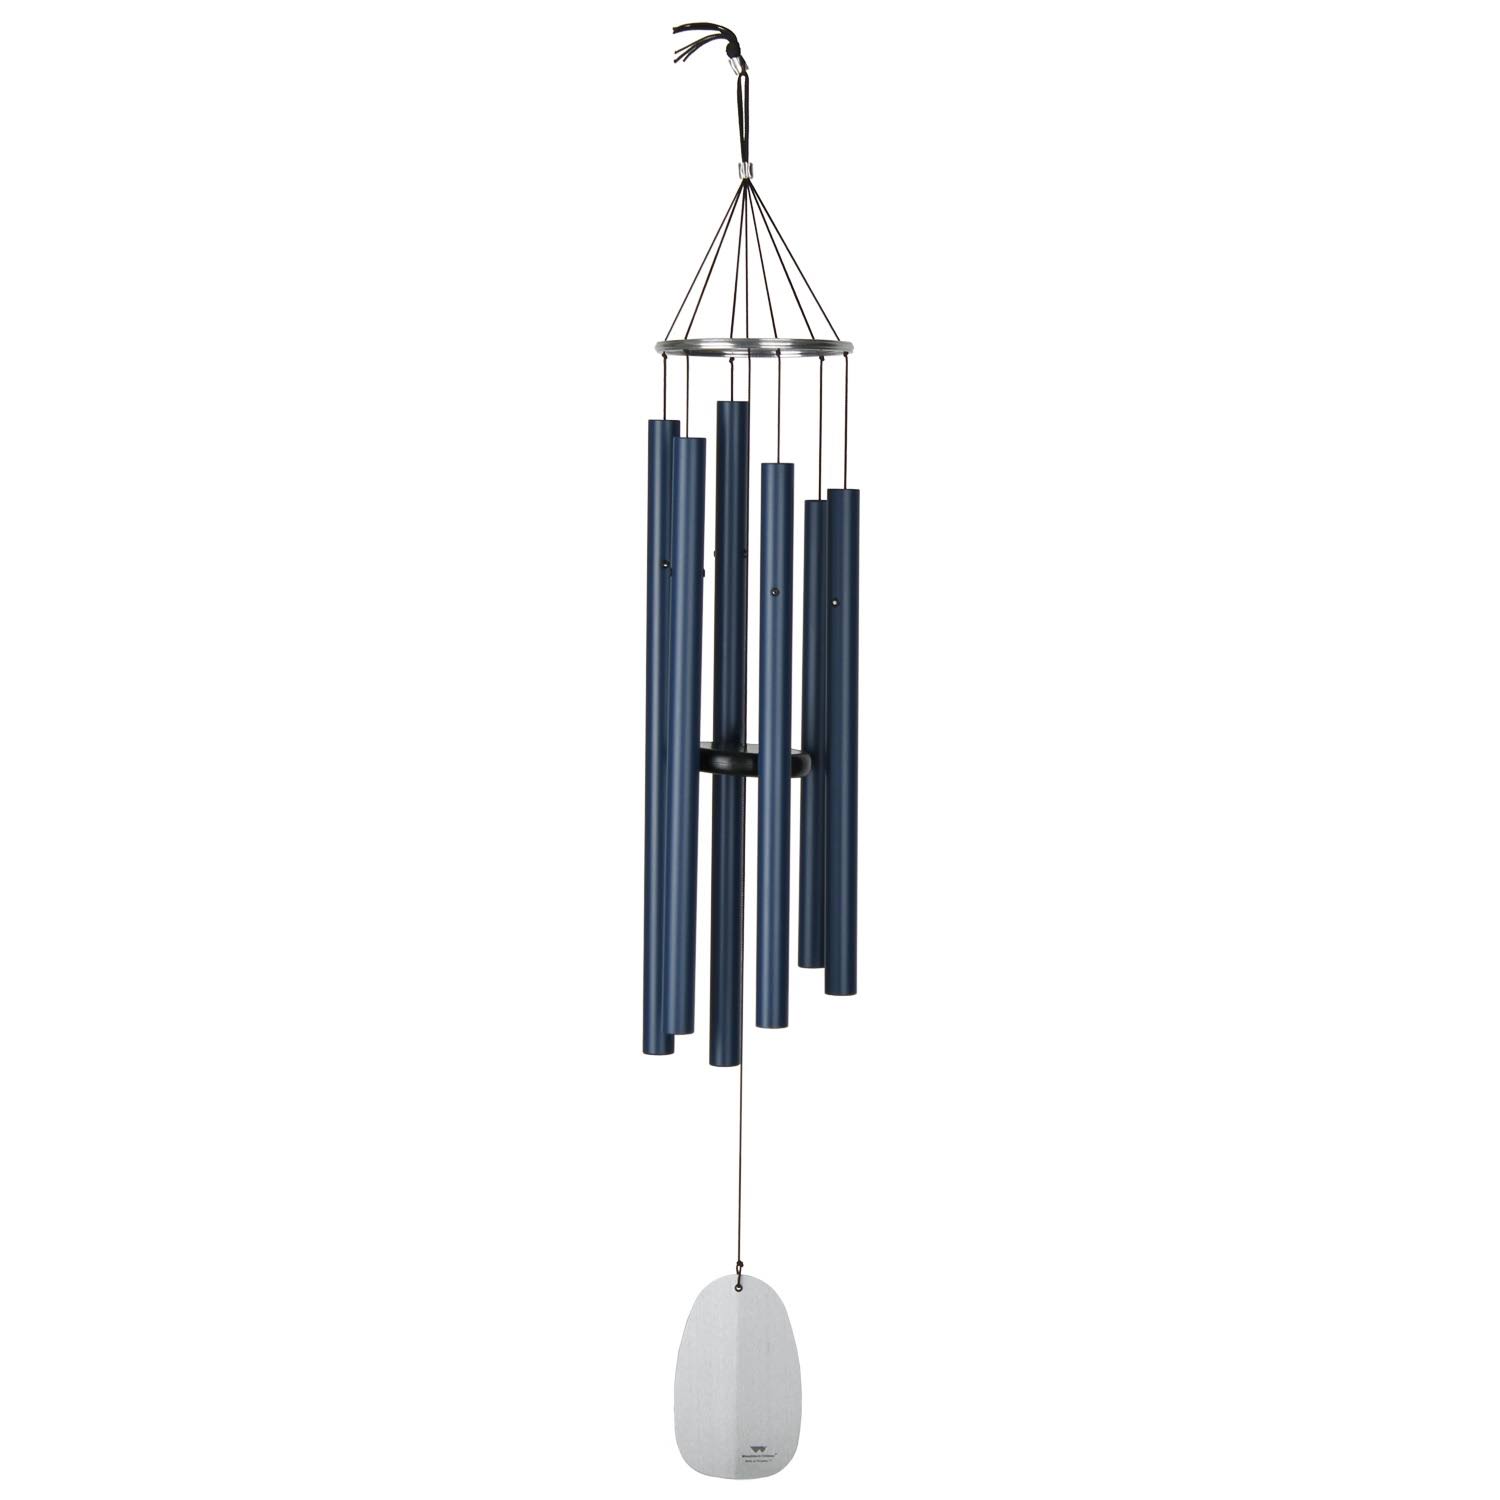 Woodstock Chimes Signature Bells of Paradise Chime - Blue, Large